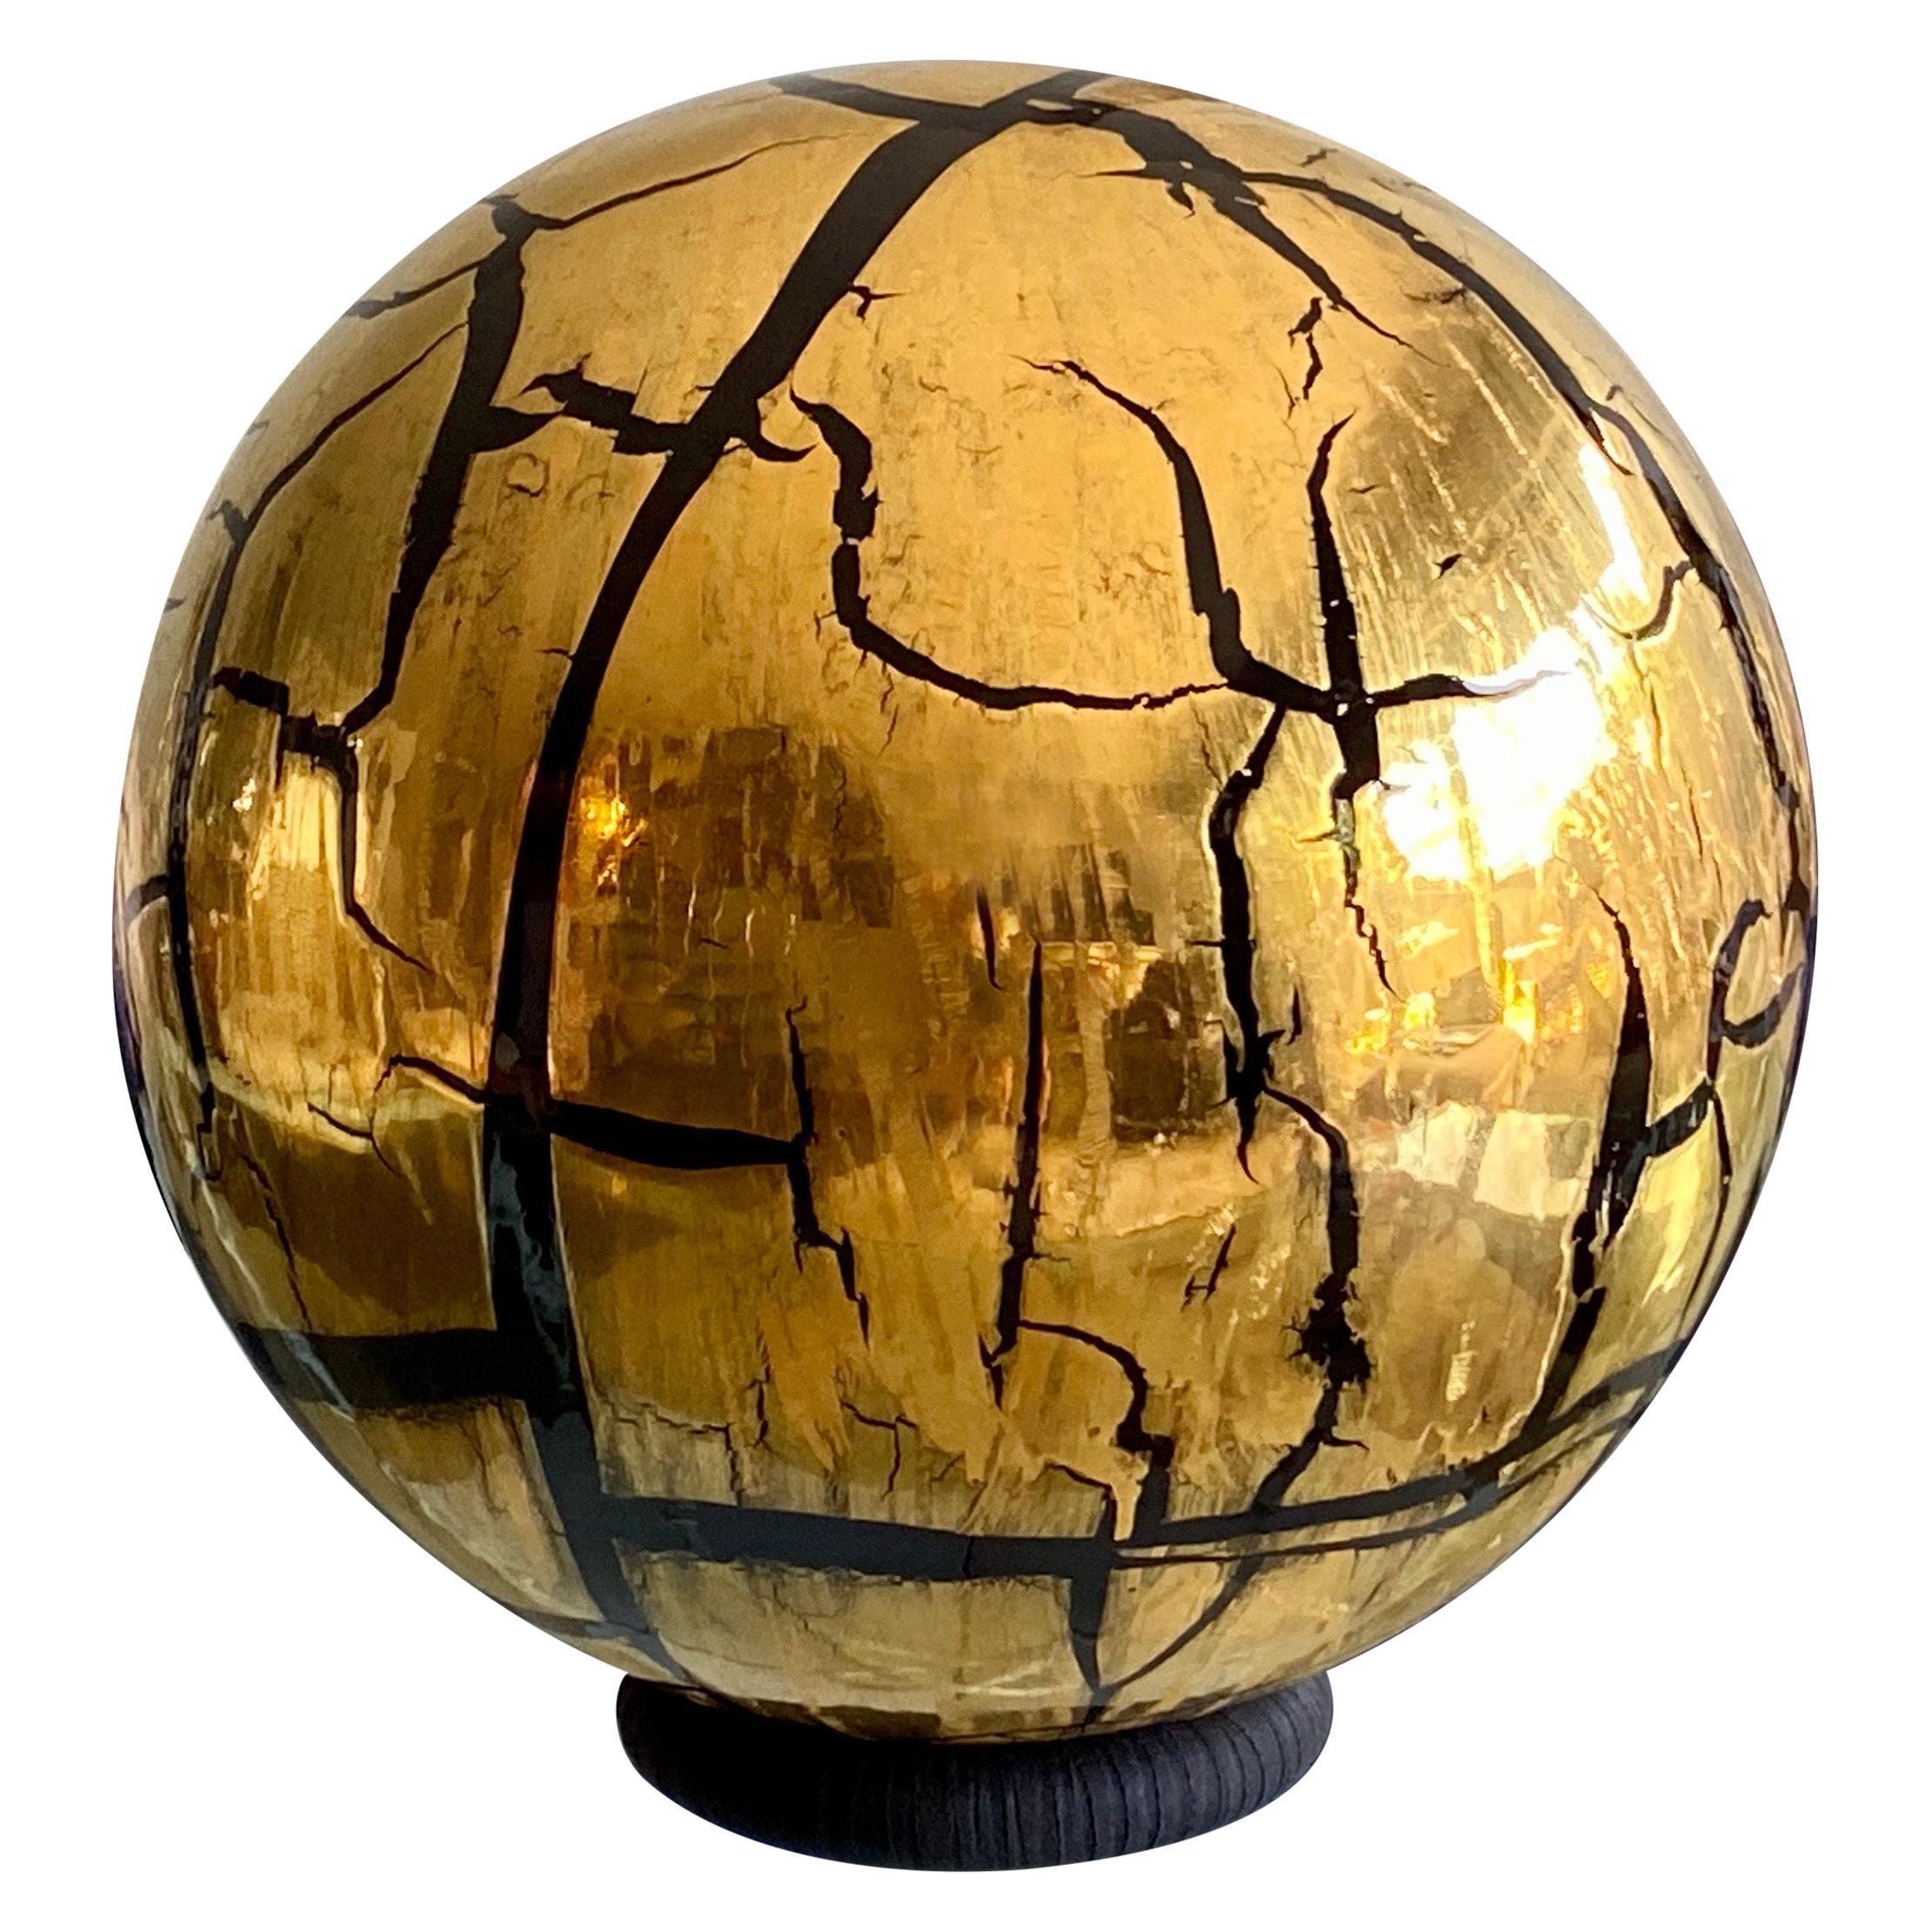 Larry Lubow Sphere Sculpture